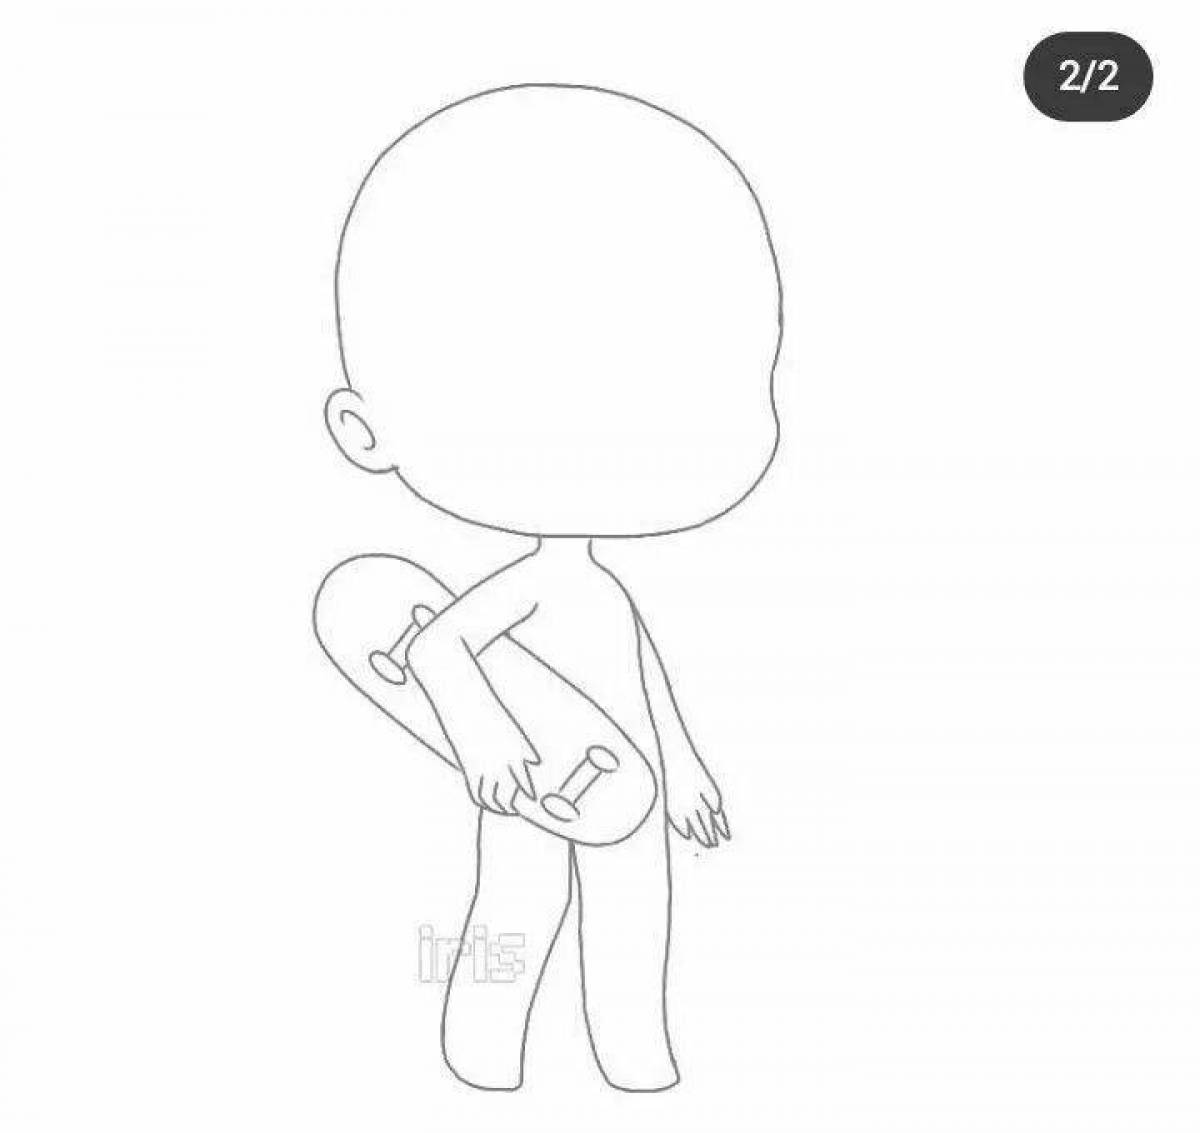 Gacha life coloring page with cheerful body